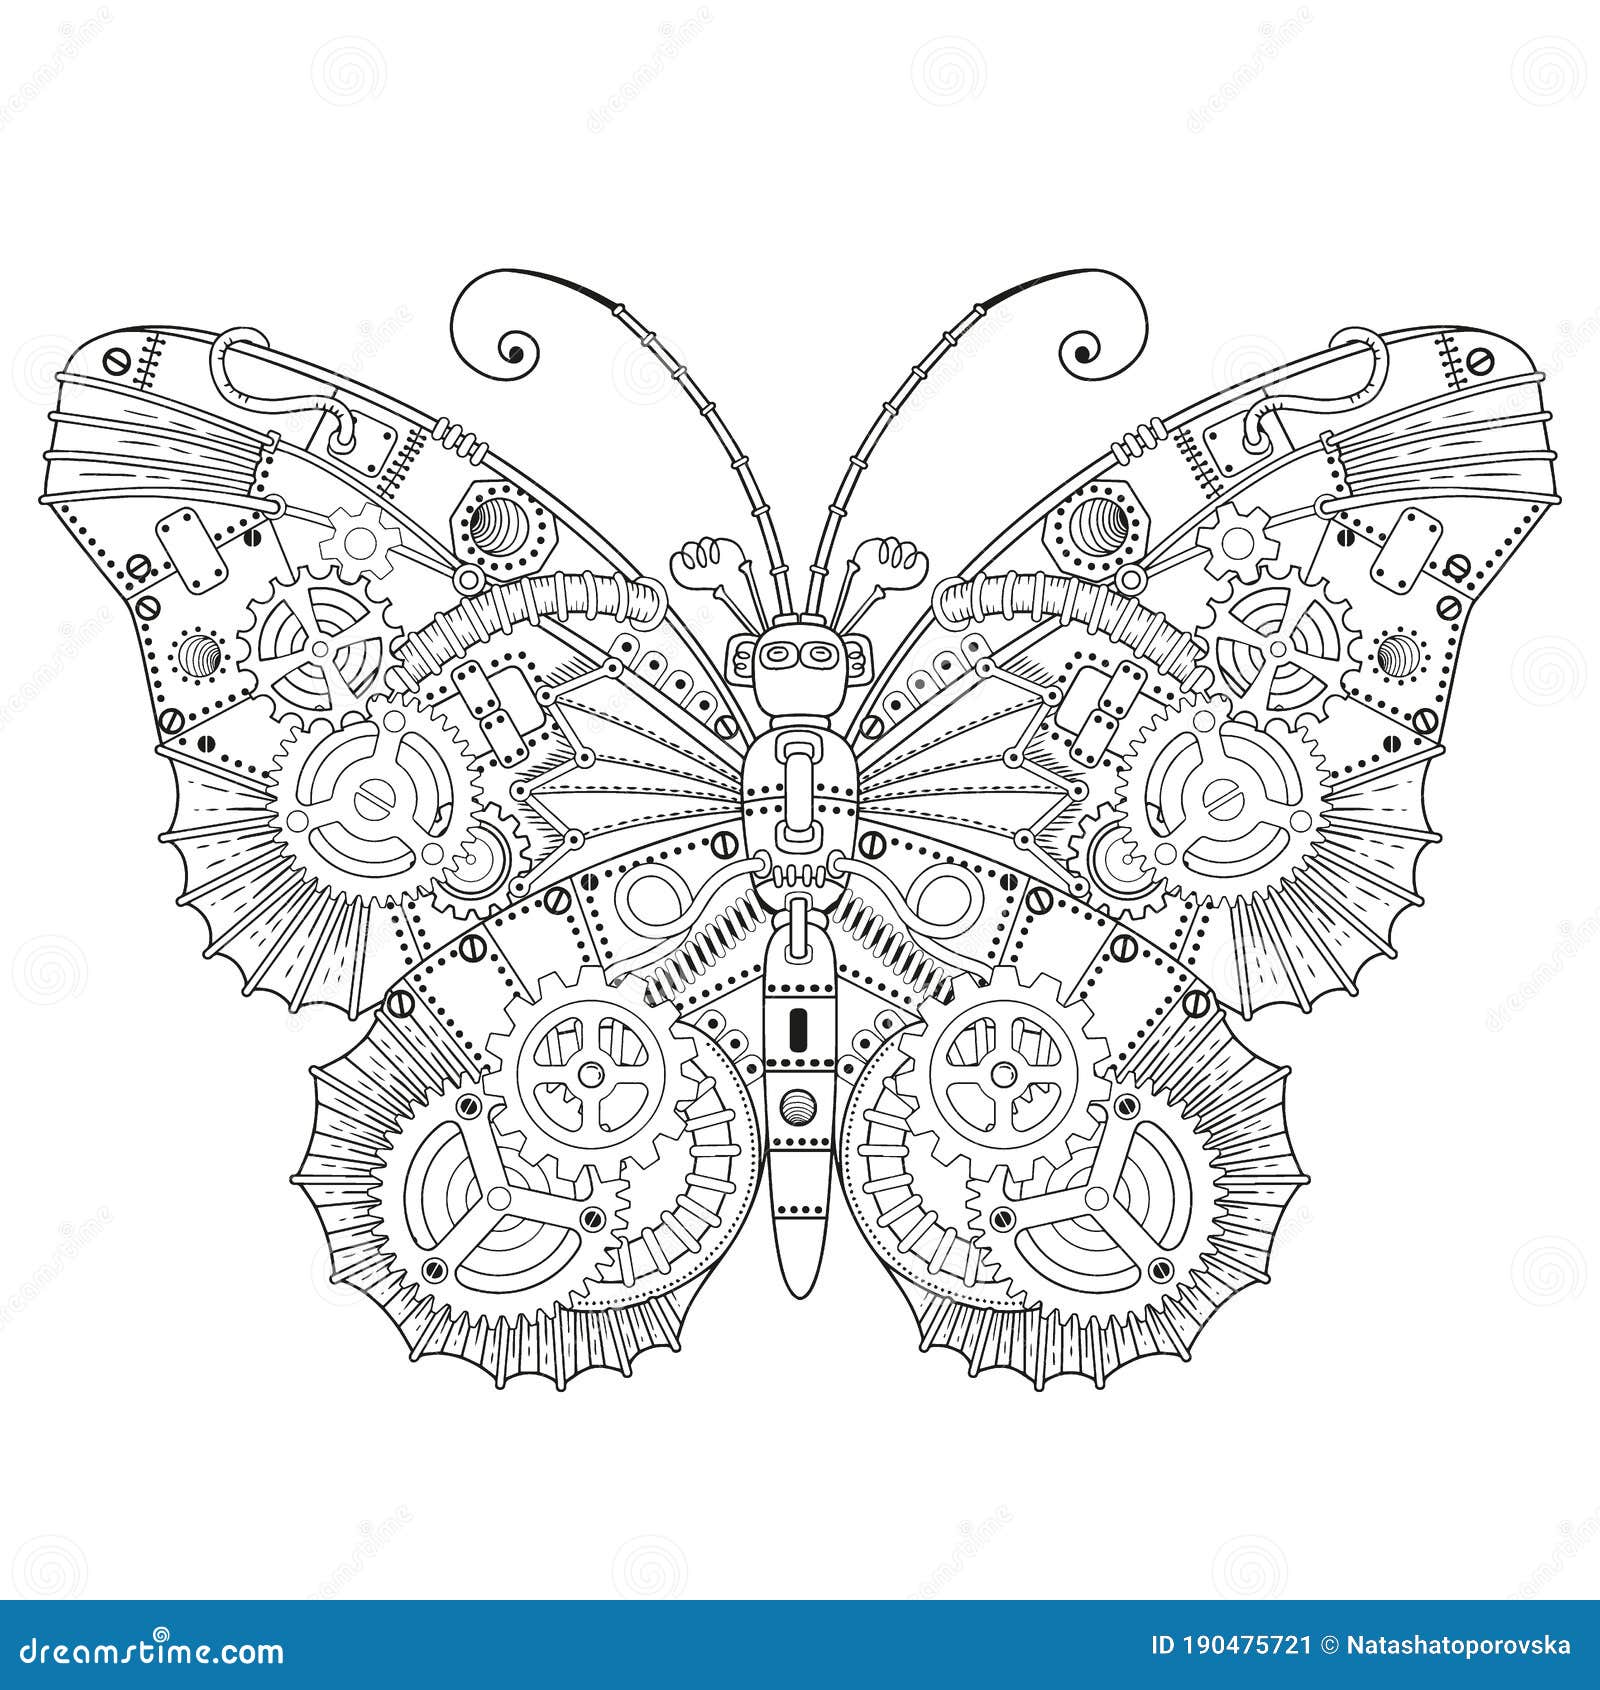 Steampunk Vector Coloring Page. Vector Coloring Book for Adult for ...